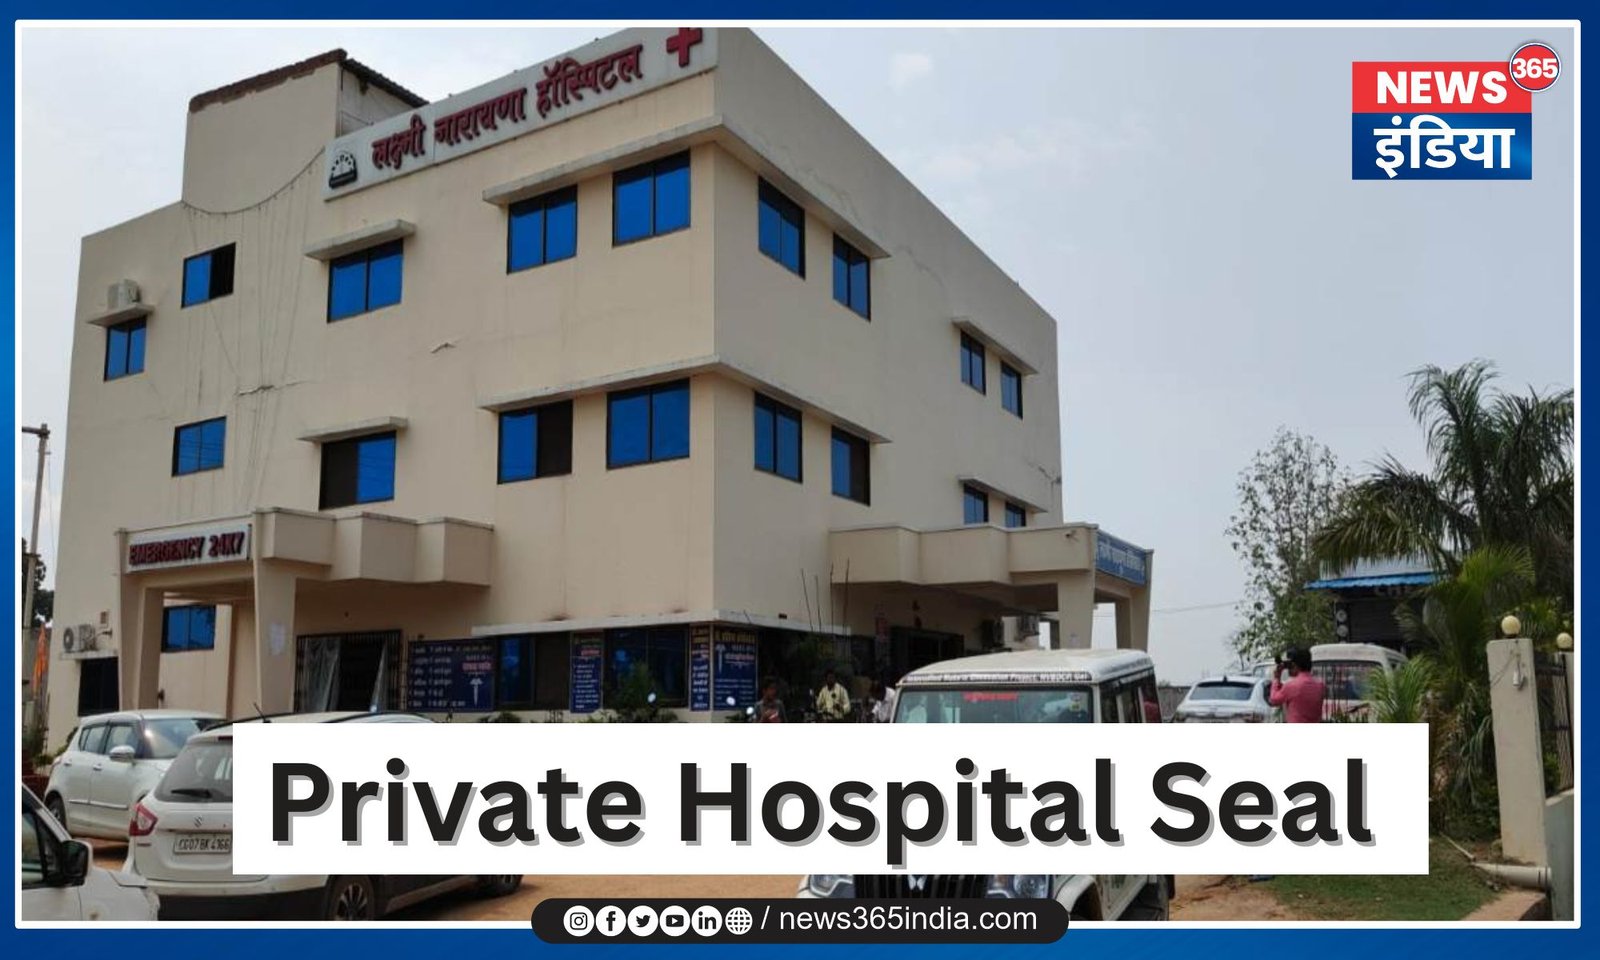 Private Hospital Sealed